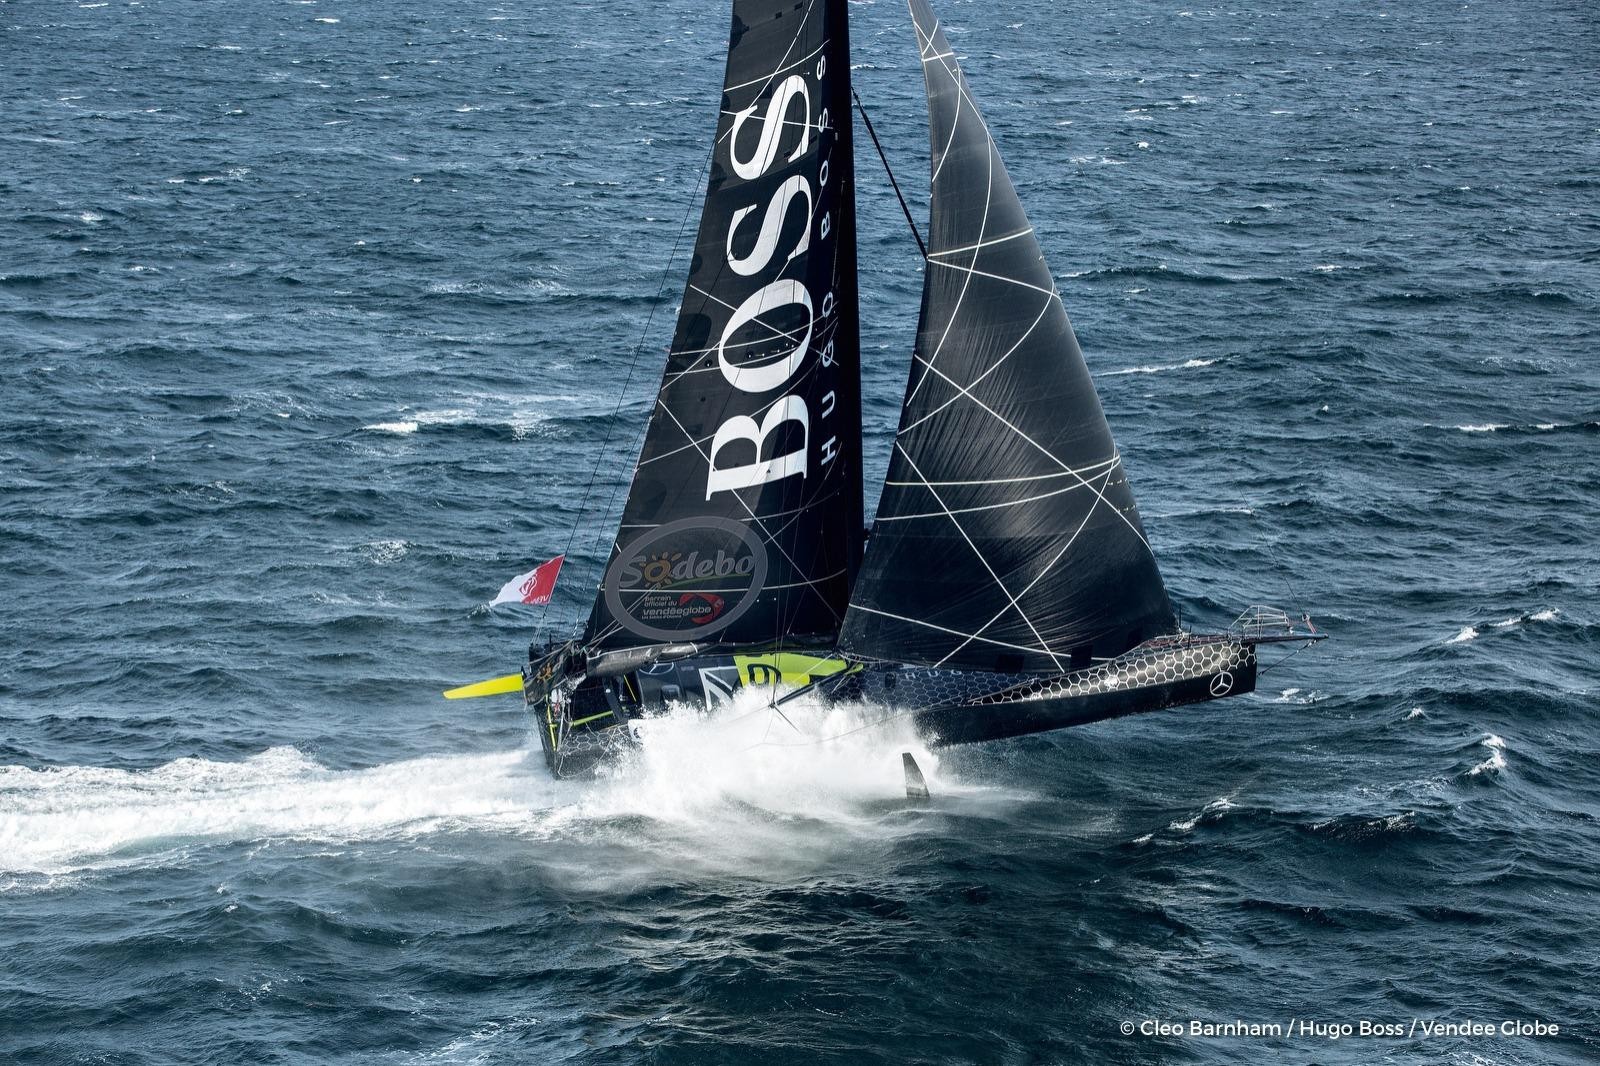 Hugo Boss slowed after possible structural issue concern